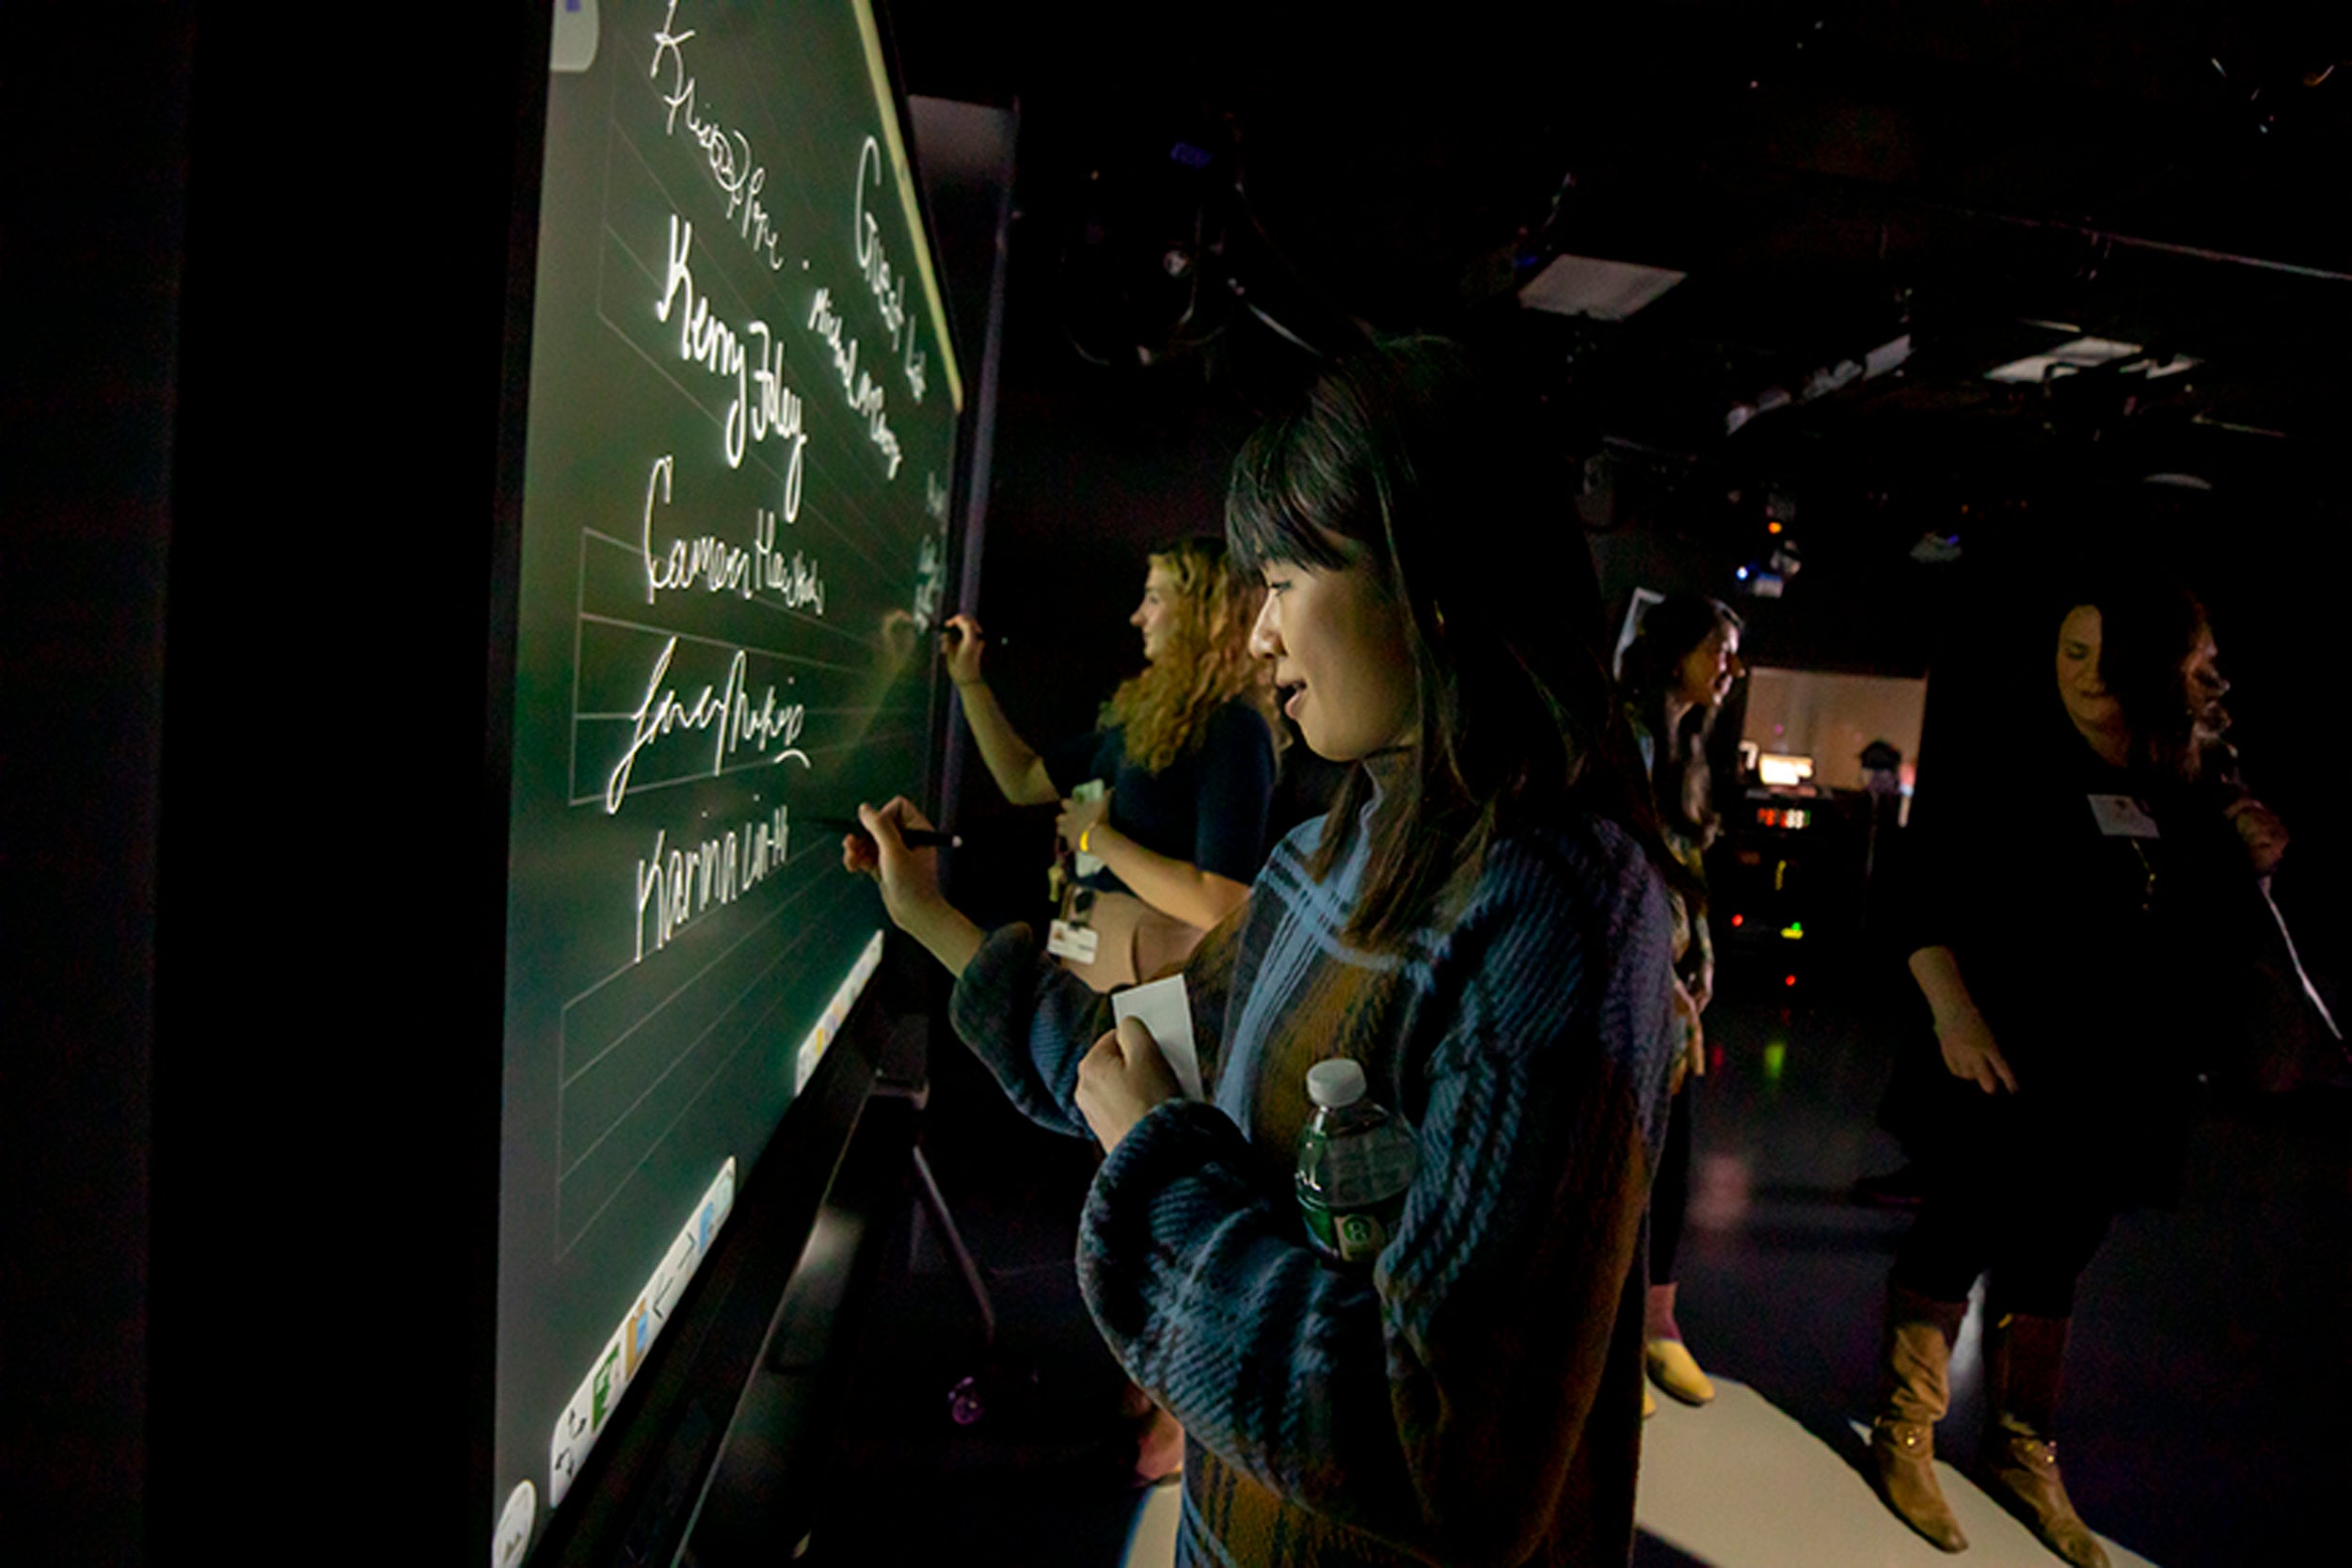 Karina Lin-Murphy writes her name on the welcome board in the new tv studio